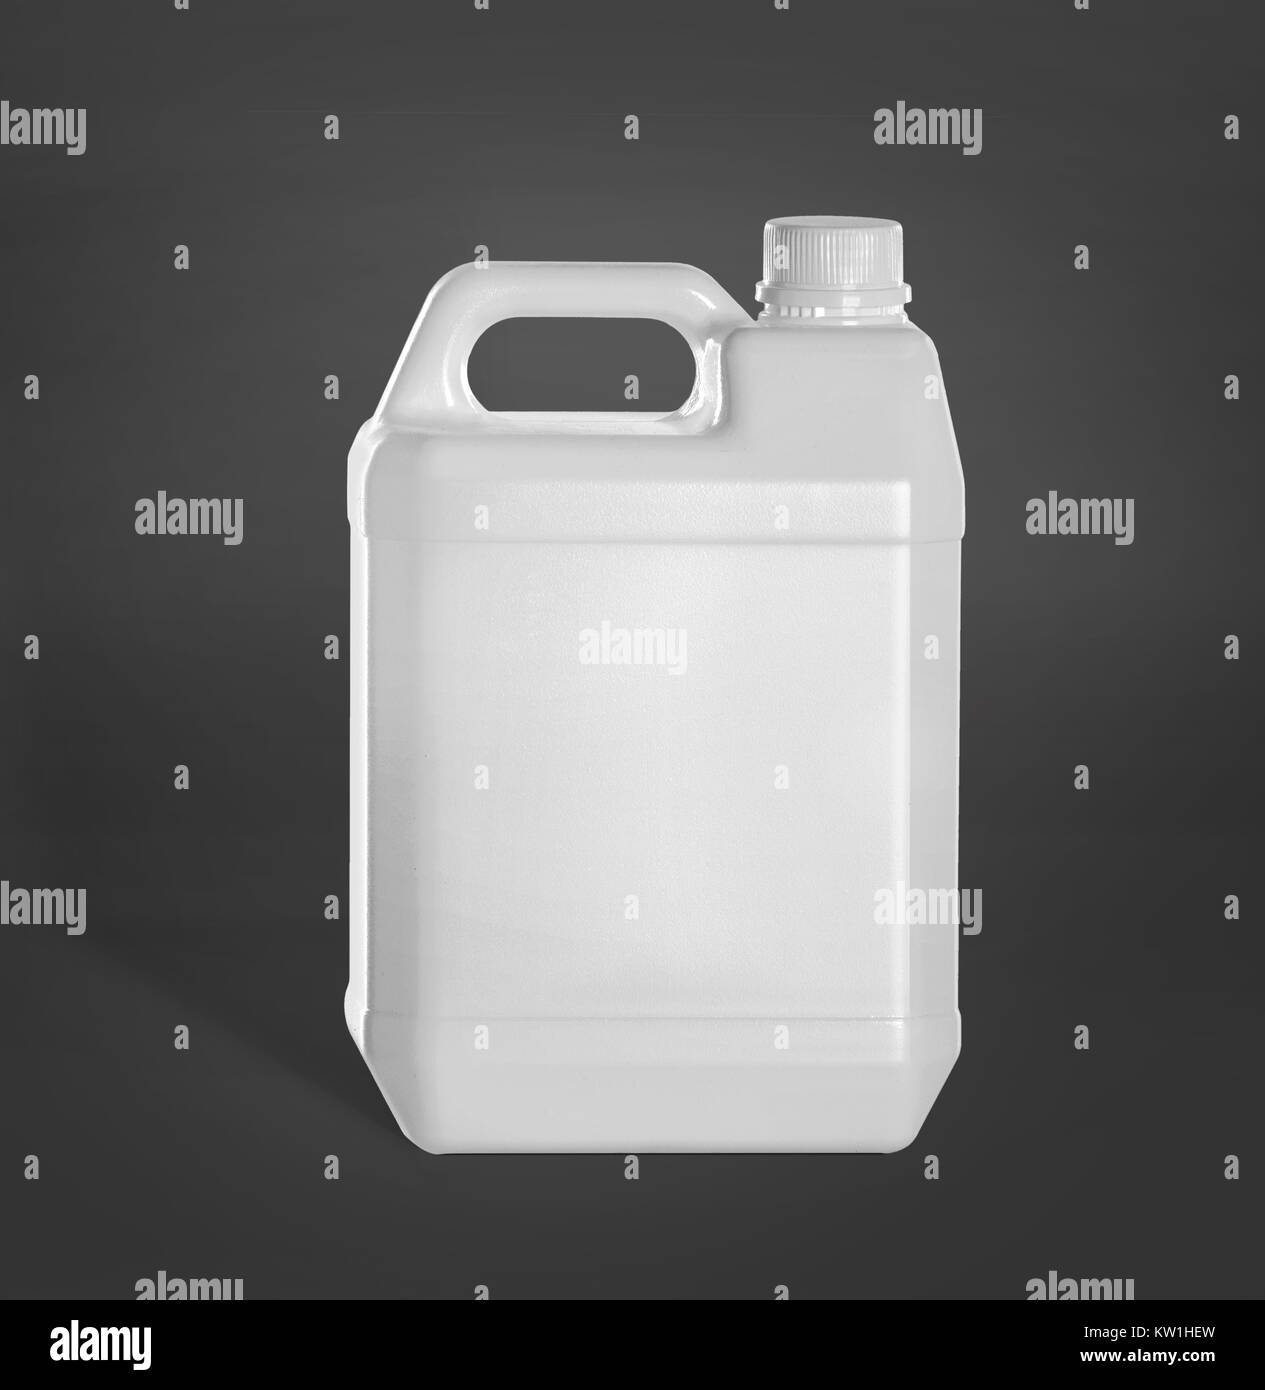 Download Plastic Jerry Can High Resolution Stock Photography And Images Alamy Yellowimages Mockups